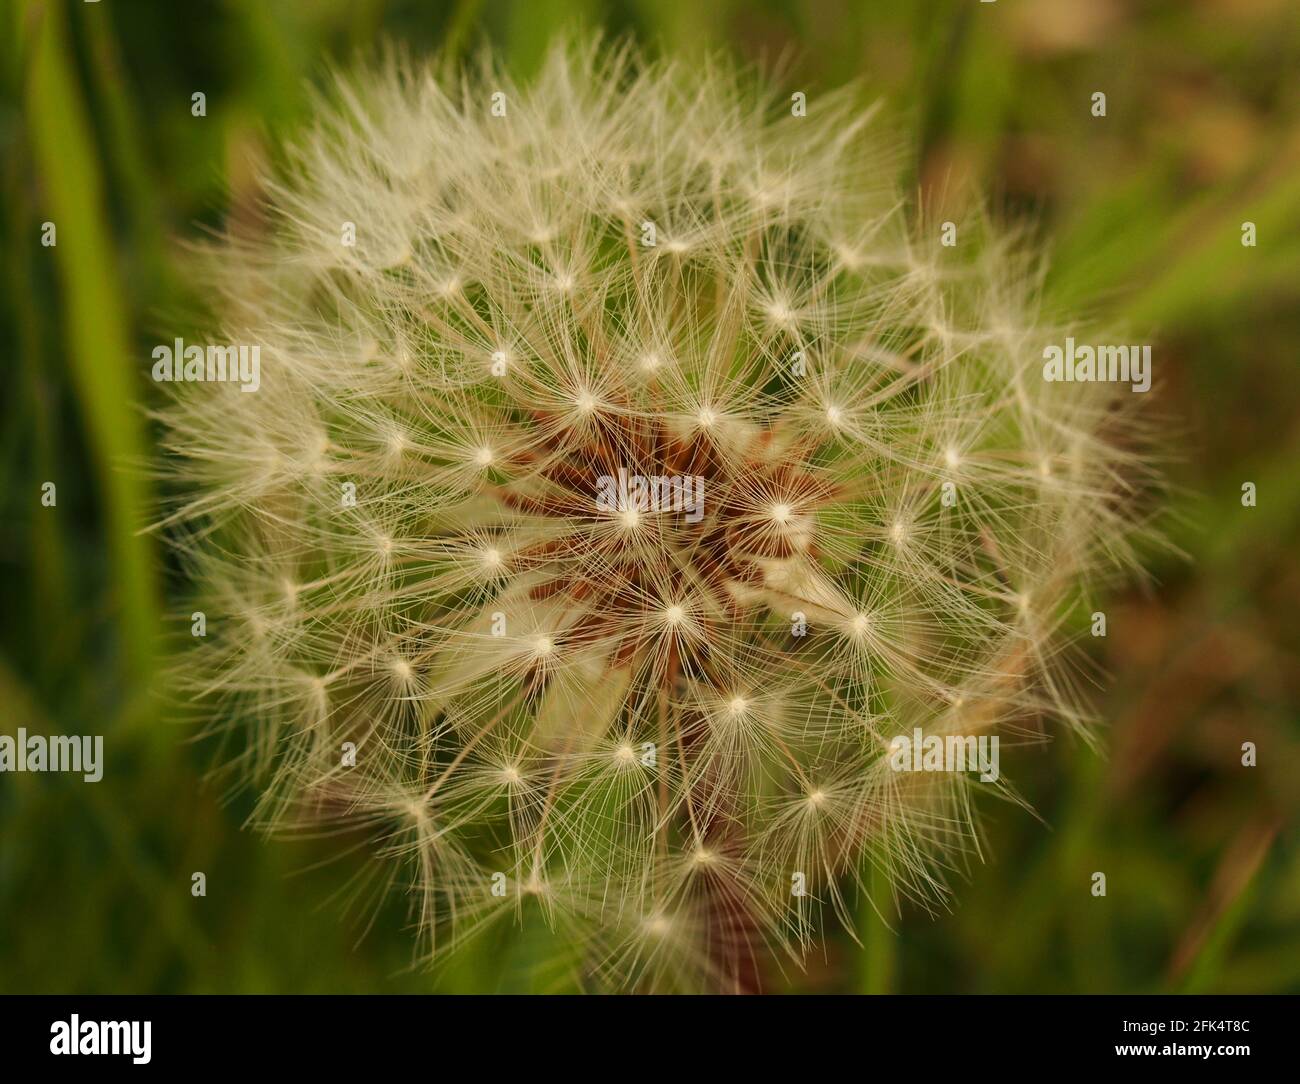 A close up view of a Dandelion seedhead in allits delicate, intricate beauty Stock Photo